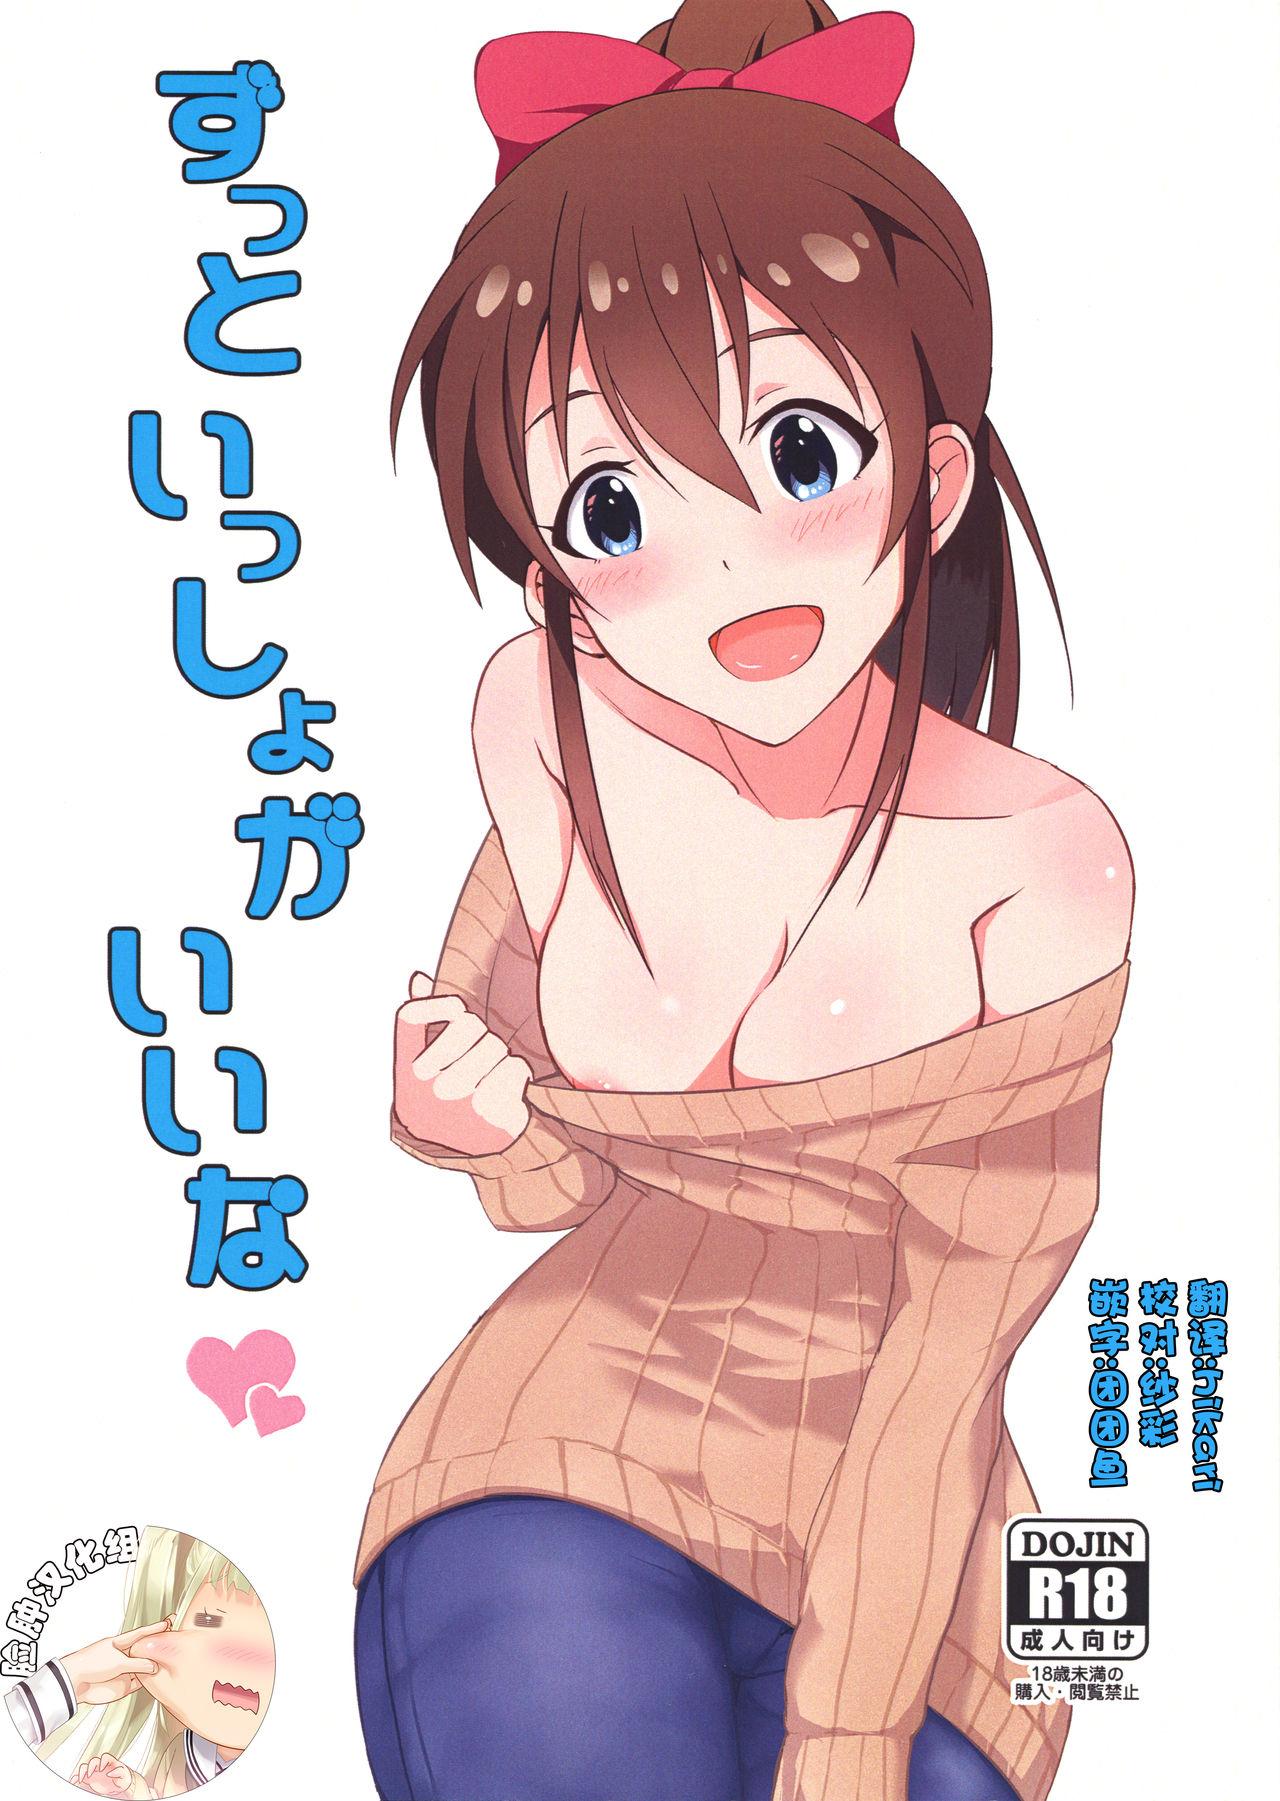 Sesso Zutto Issho ga Ii na - The idolmaster Russian - Page 1